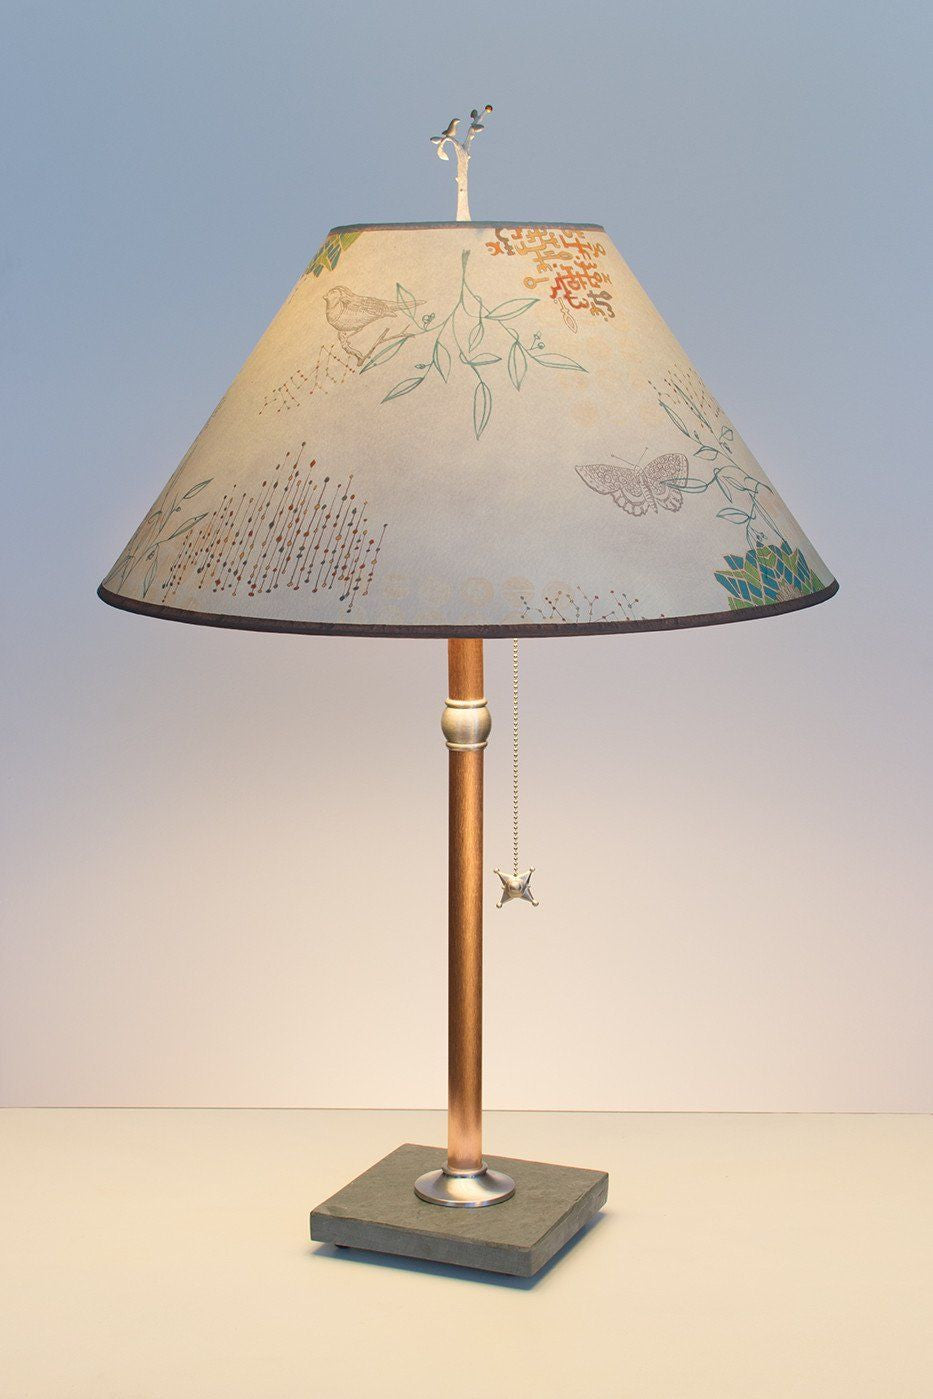 Janna Ugone & Co Table Lamps Copper Table Lamp with Large Conical Shade in Ecru Journey